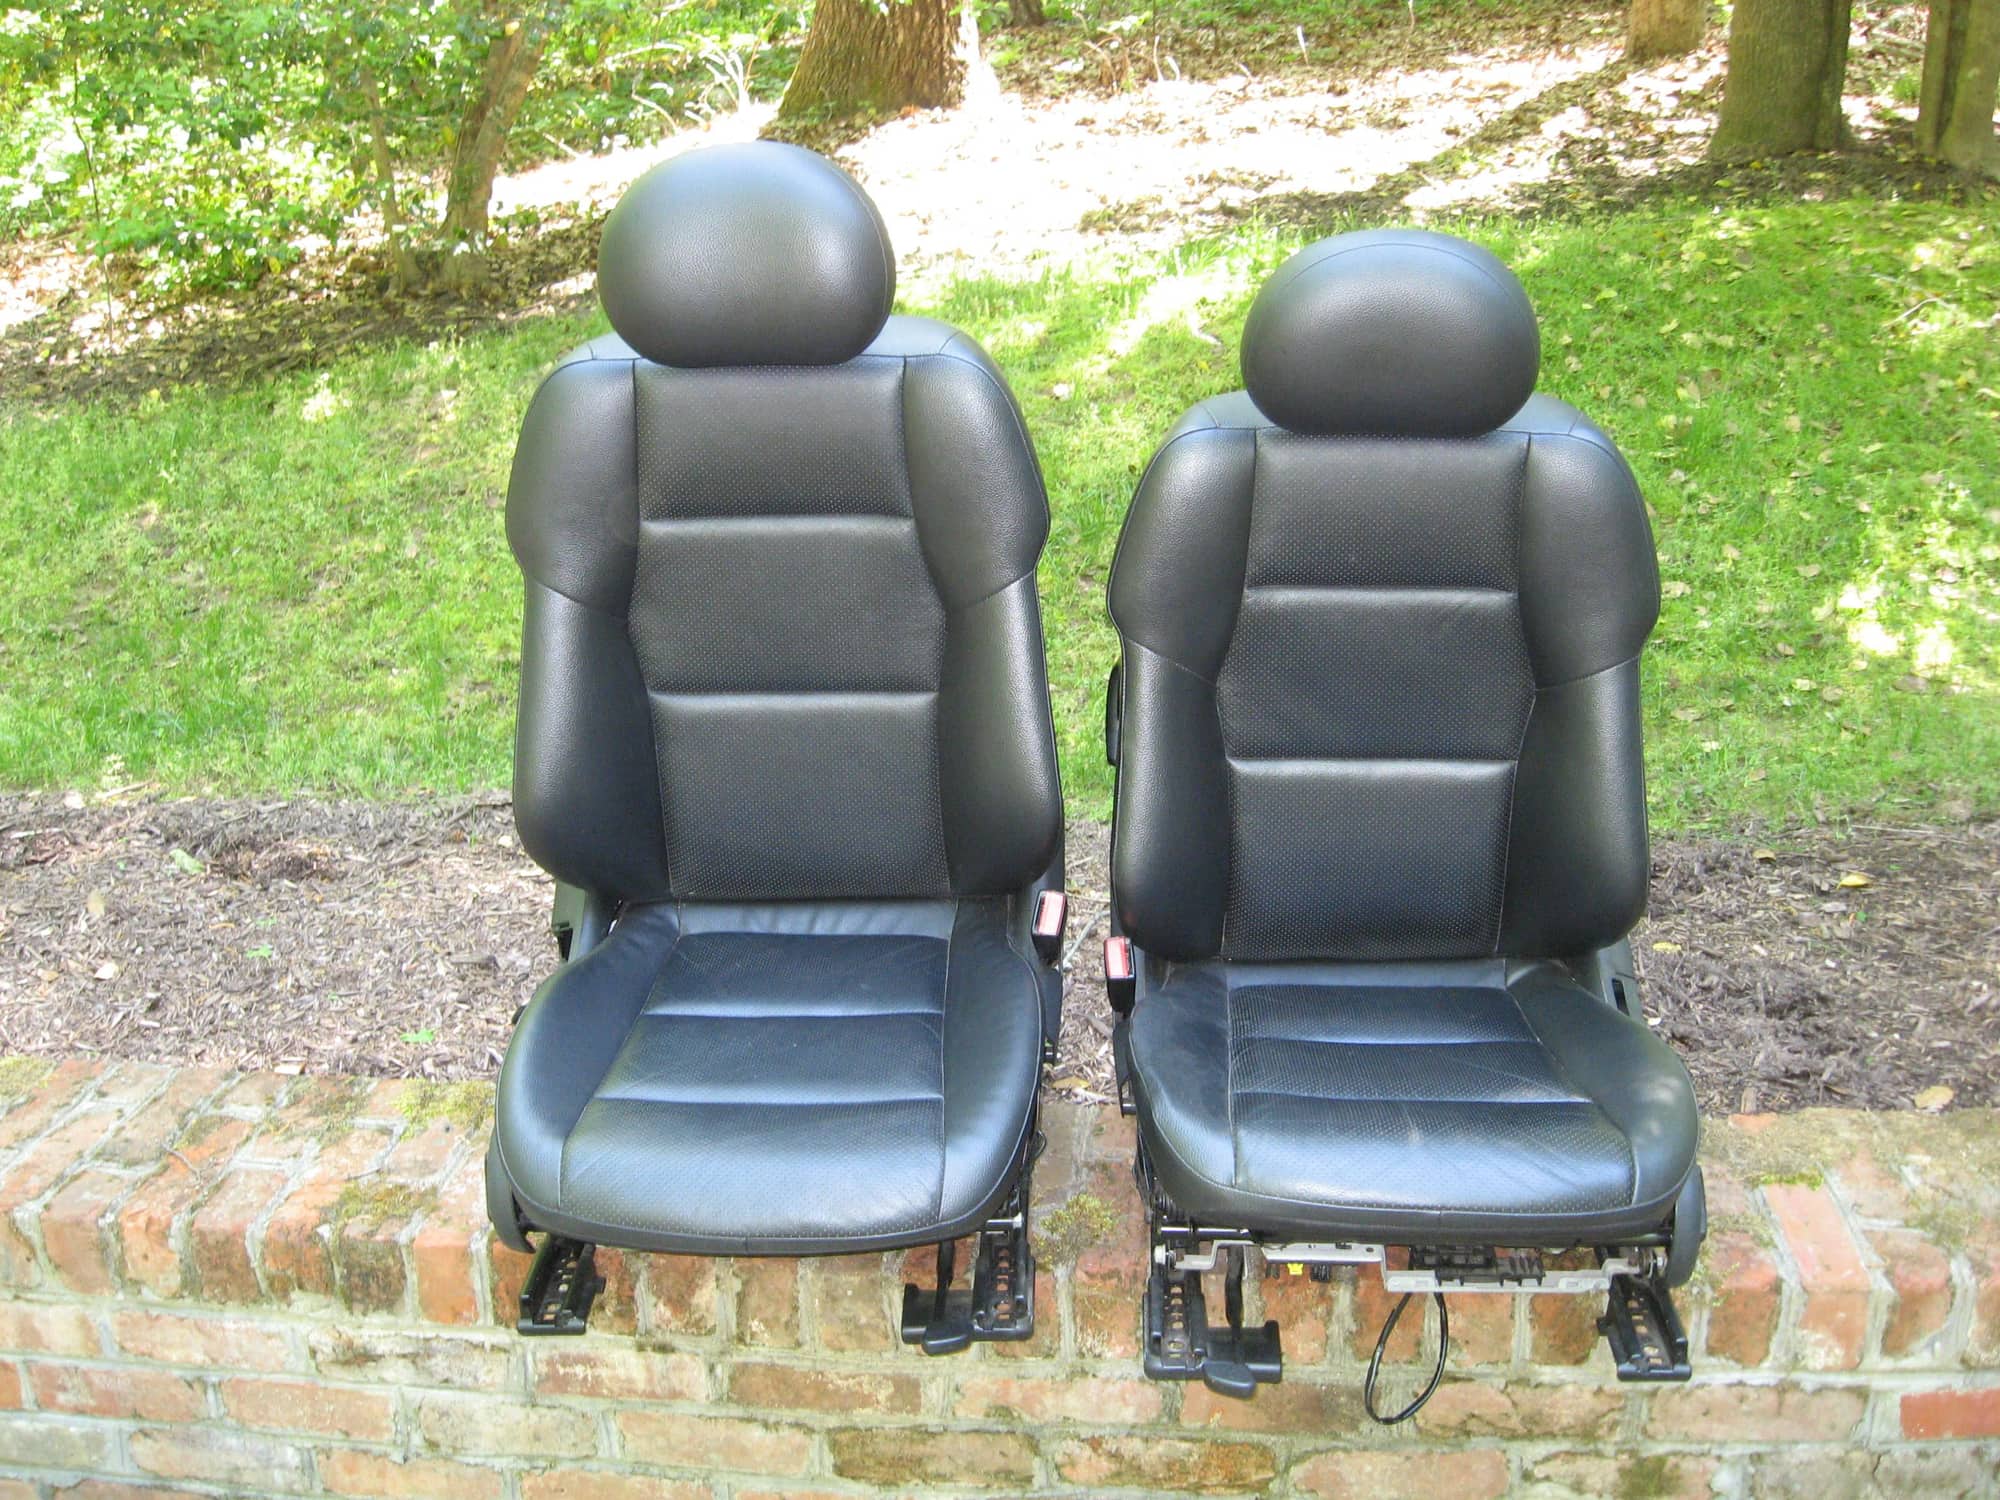 Interior/Upholstery - 2005 C230 Front Seats - Black Leather/MB Tex - Heated - Used - 2001 to 2007 Mercedes-Benz C230 - 2001 to 2007 Mercedes-Benz C240 - 2001 to 2007 Mercedes-Benz C320 - North Chesterfield, VA 23236, United States